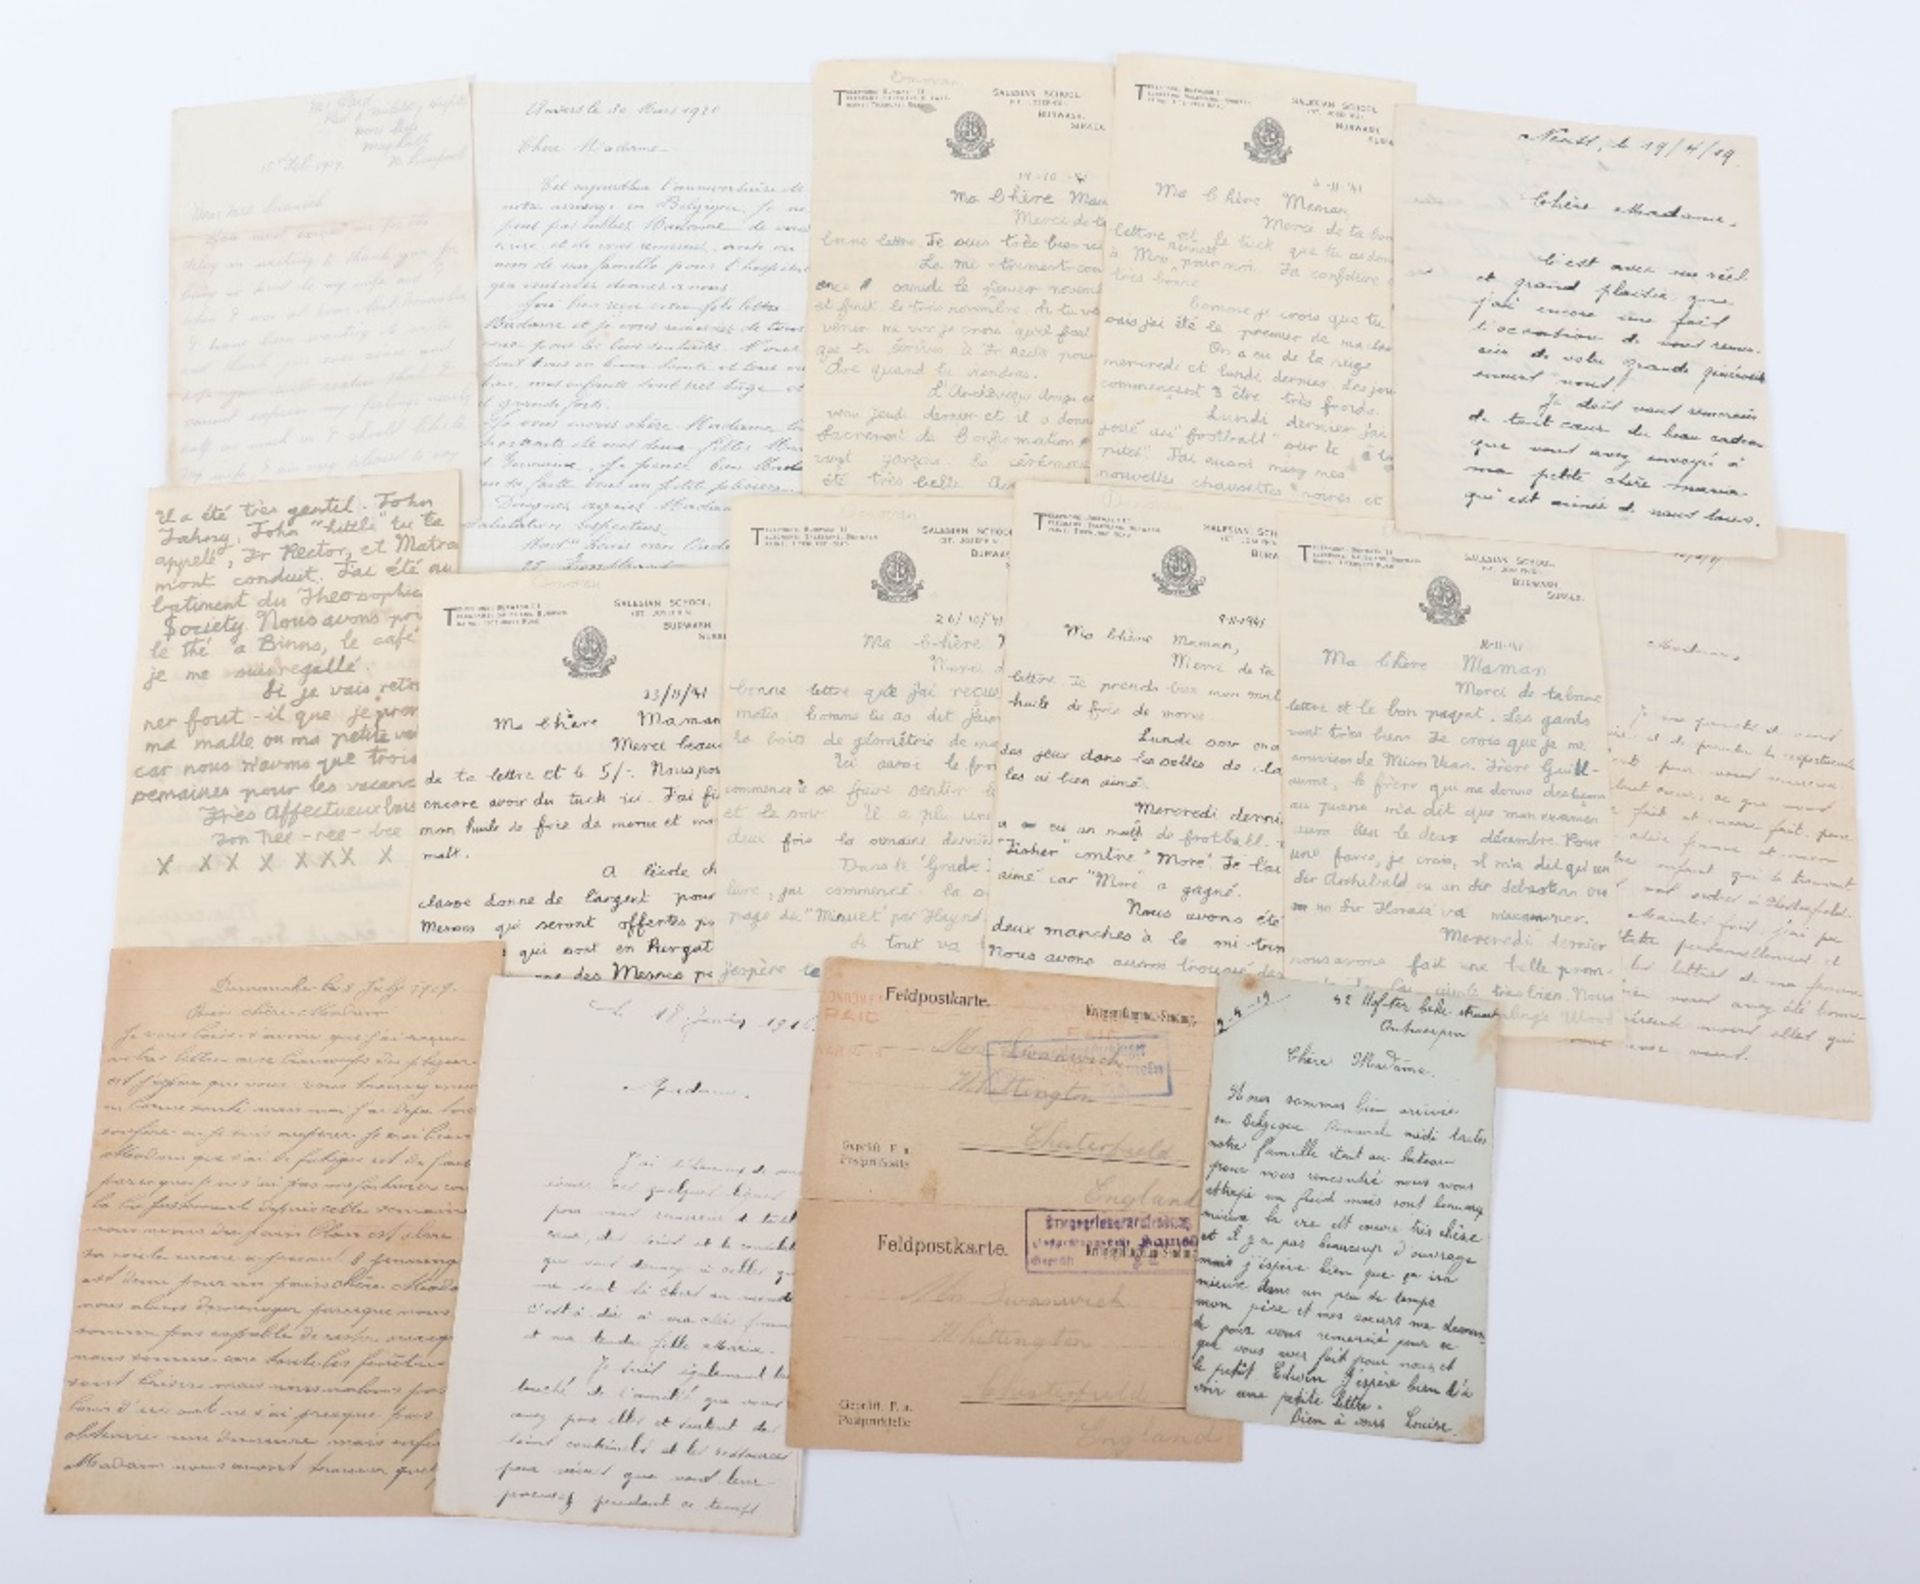 Archive of Letters etc. to a Mrs E. Swanick of Chesterfield who Supported POW's and Refugees in WWI - Image 9 of 12